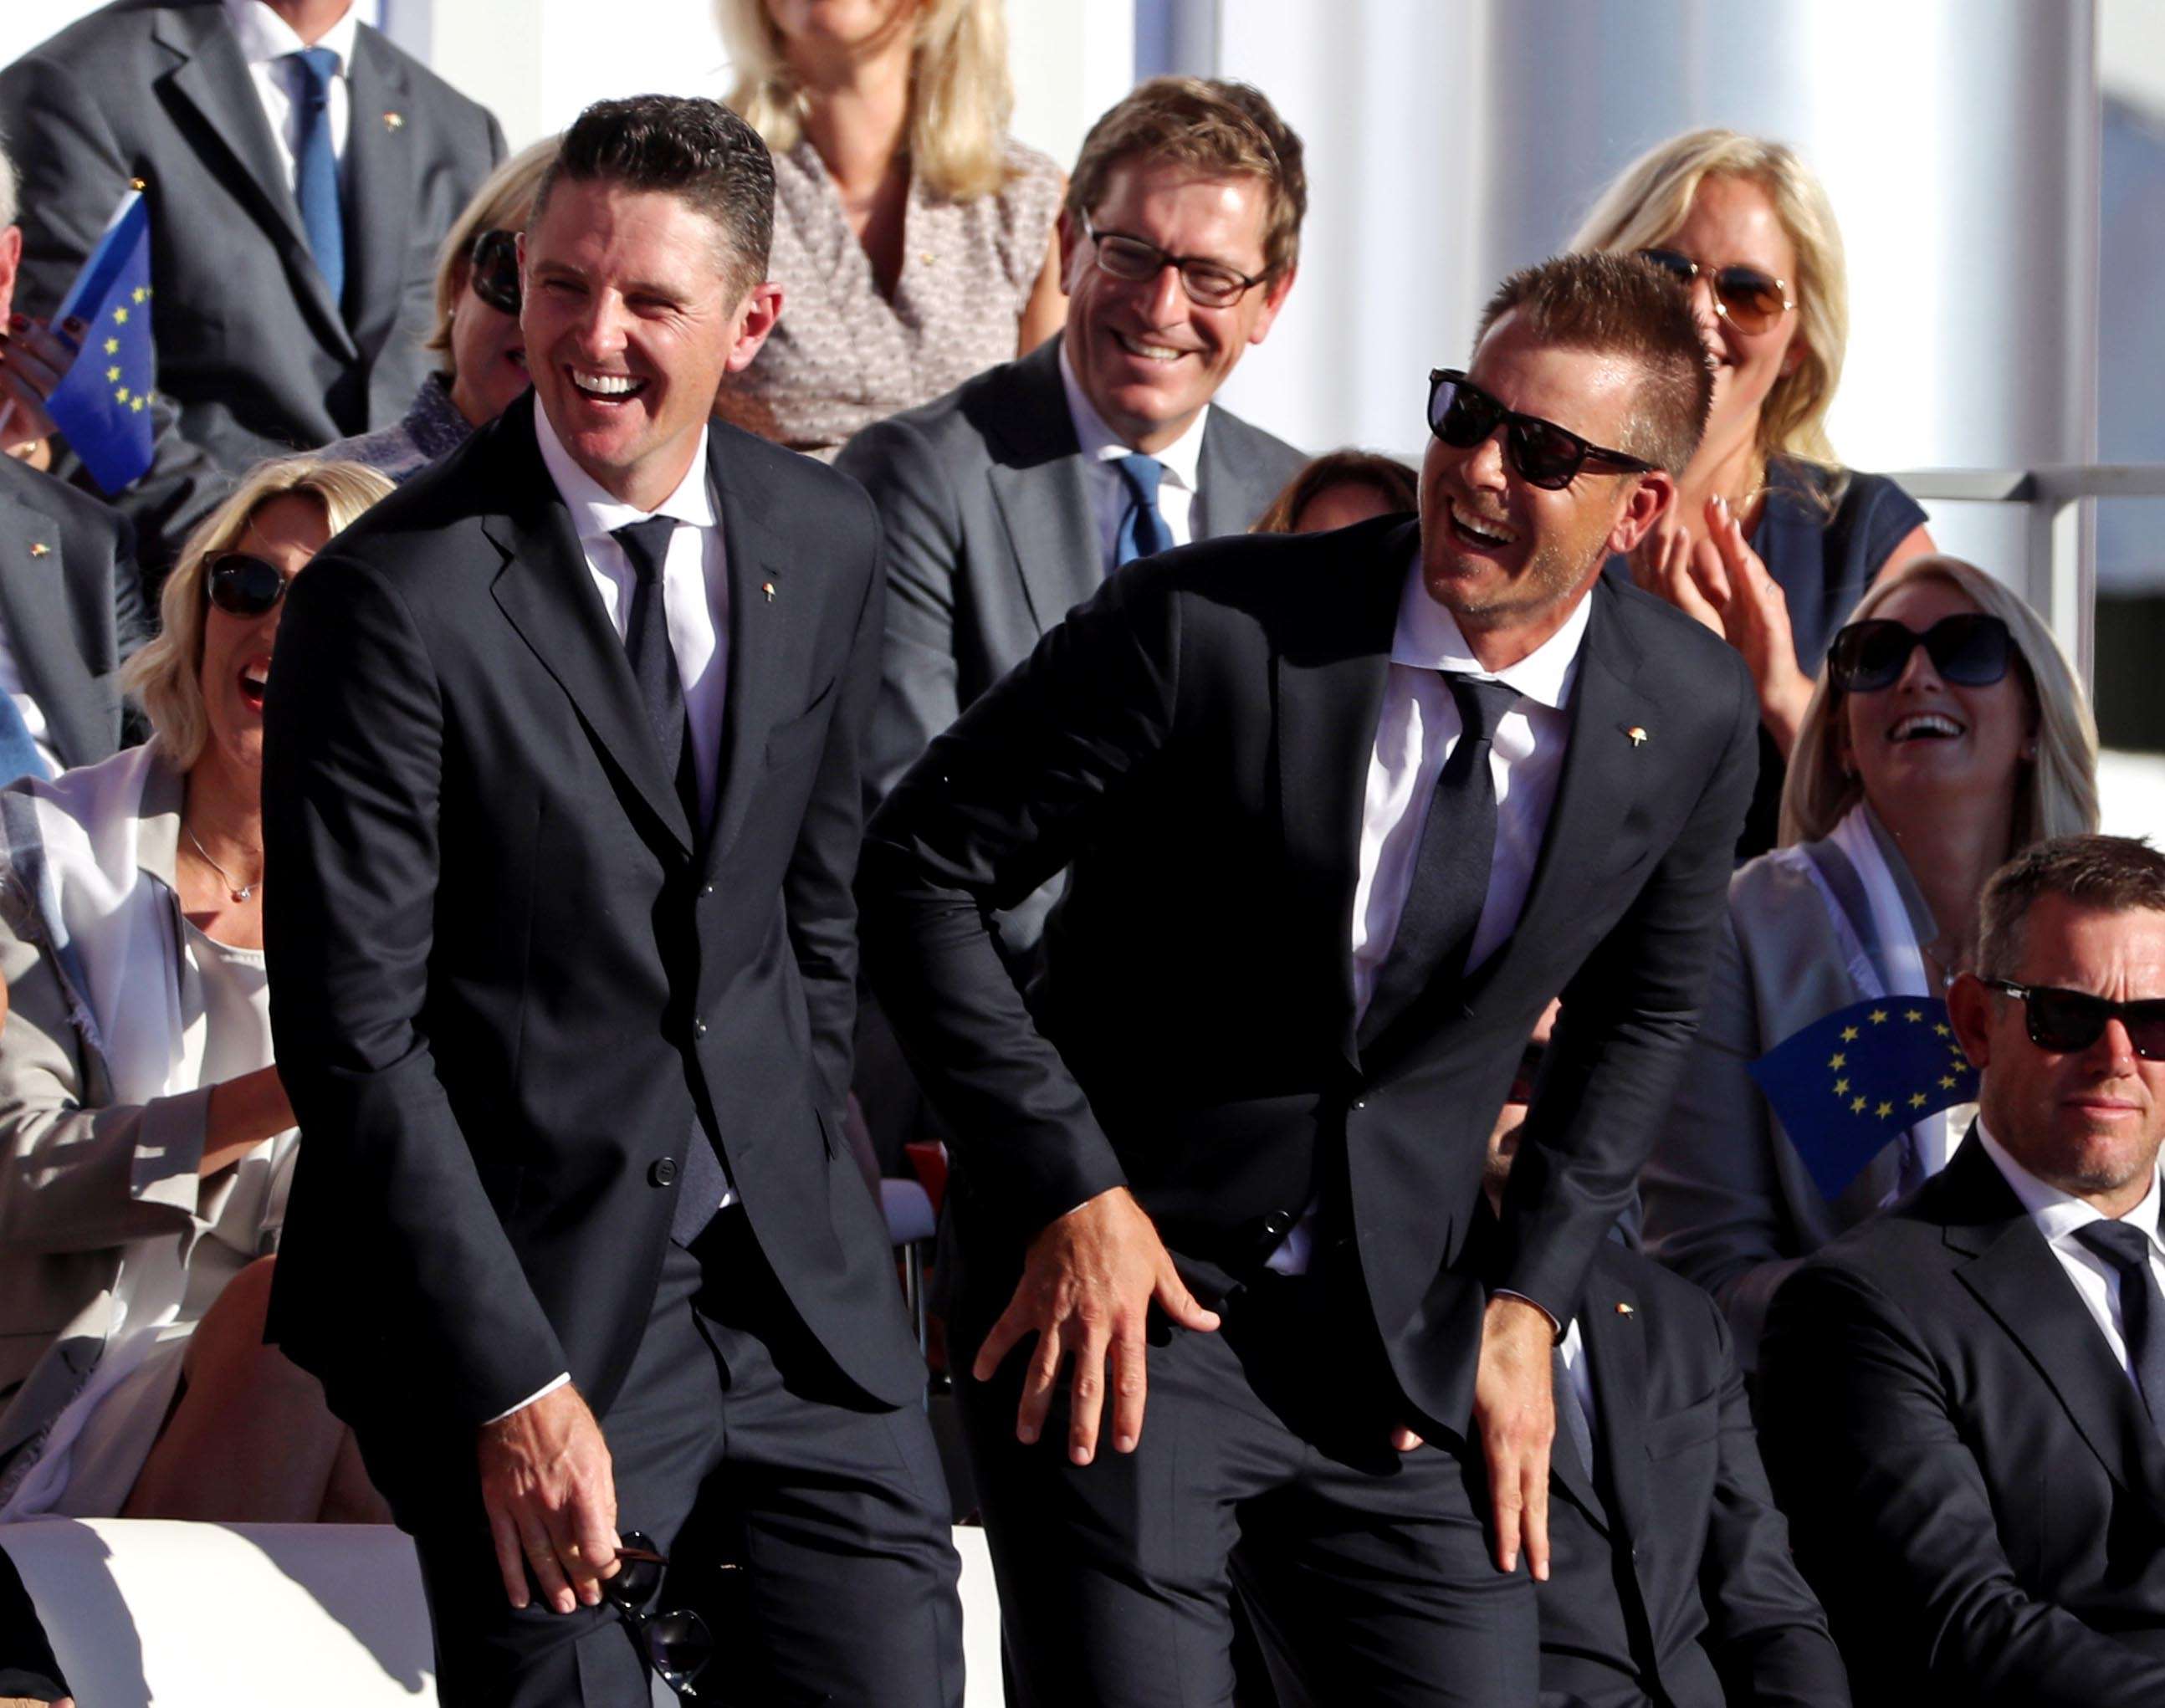 Justin Rose of England and Henrik Stenson of Sweden laugh during the Opening Ceremony for the 41st Ryder Cup. They have been paired together as Europe’s strongest two. Photo: USA Today